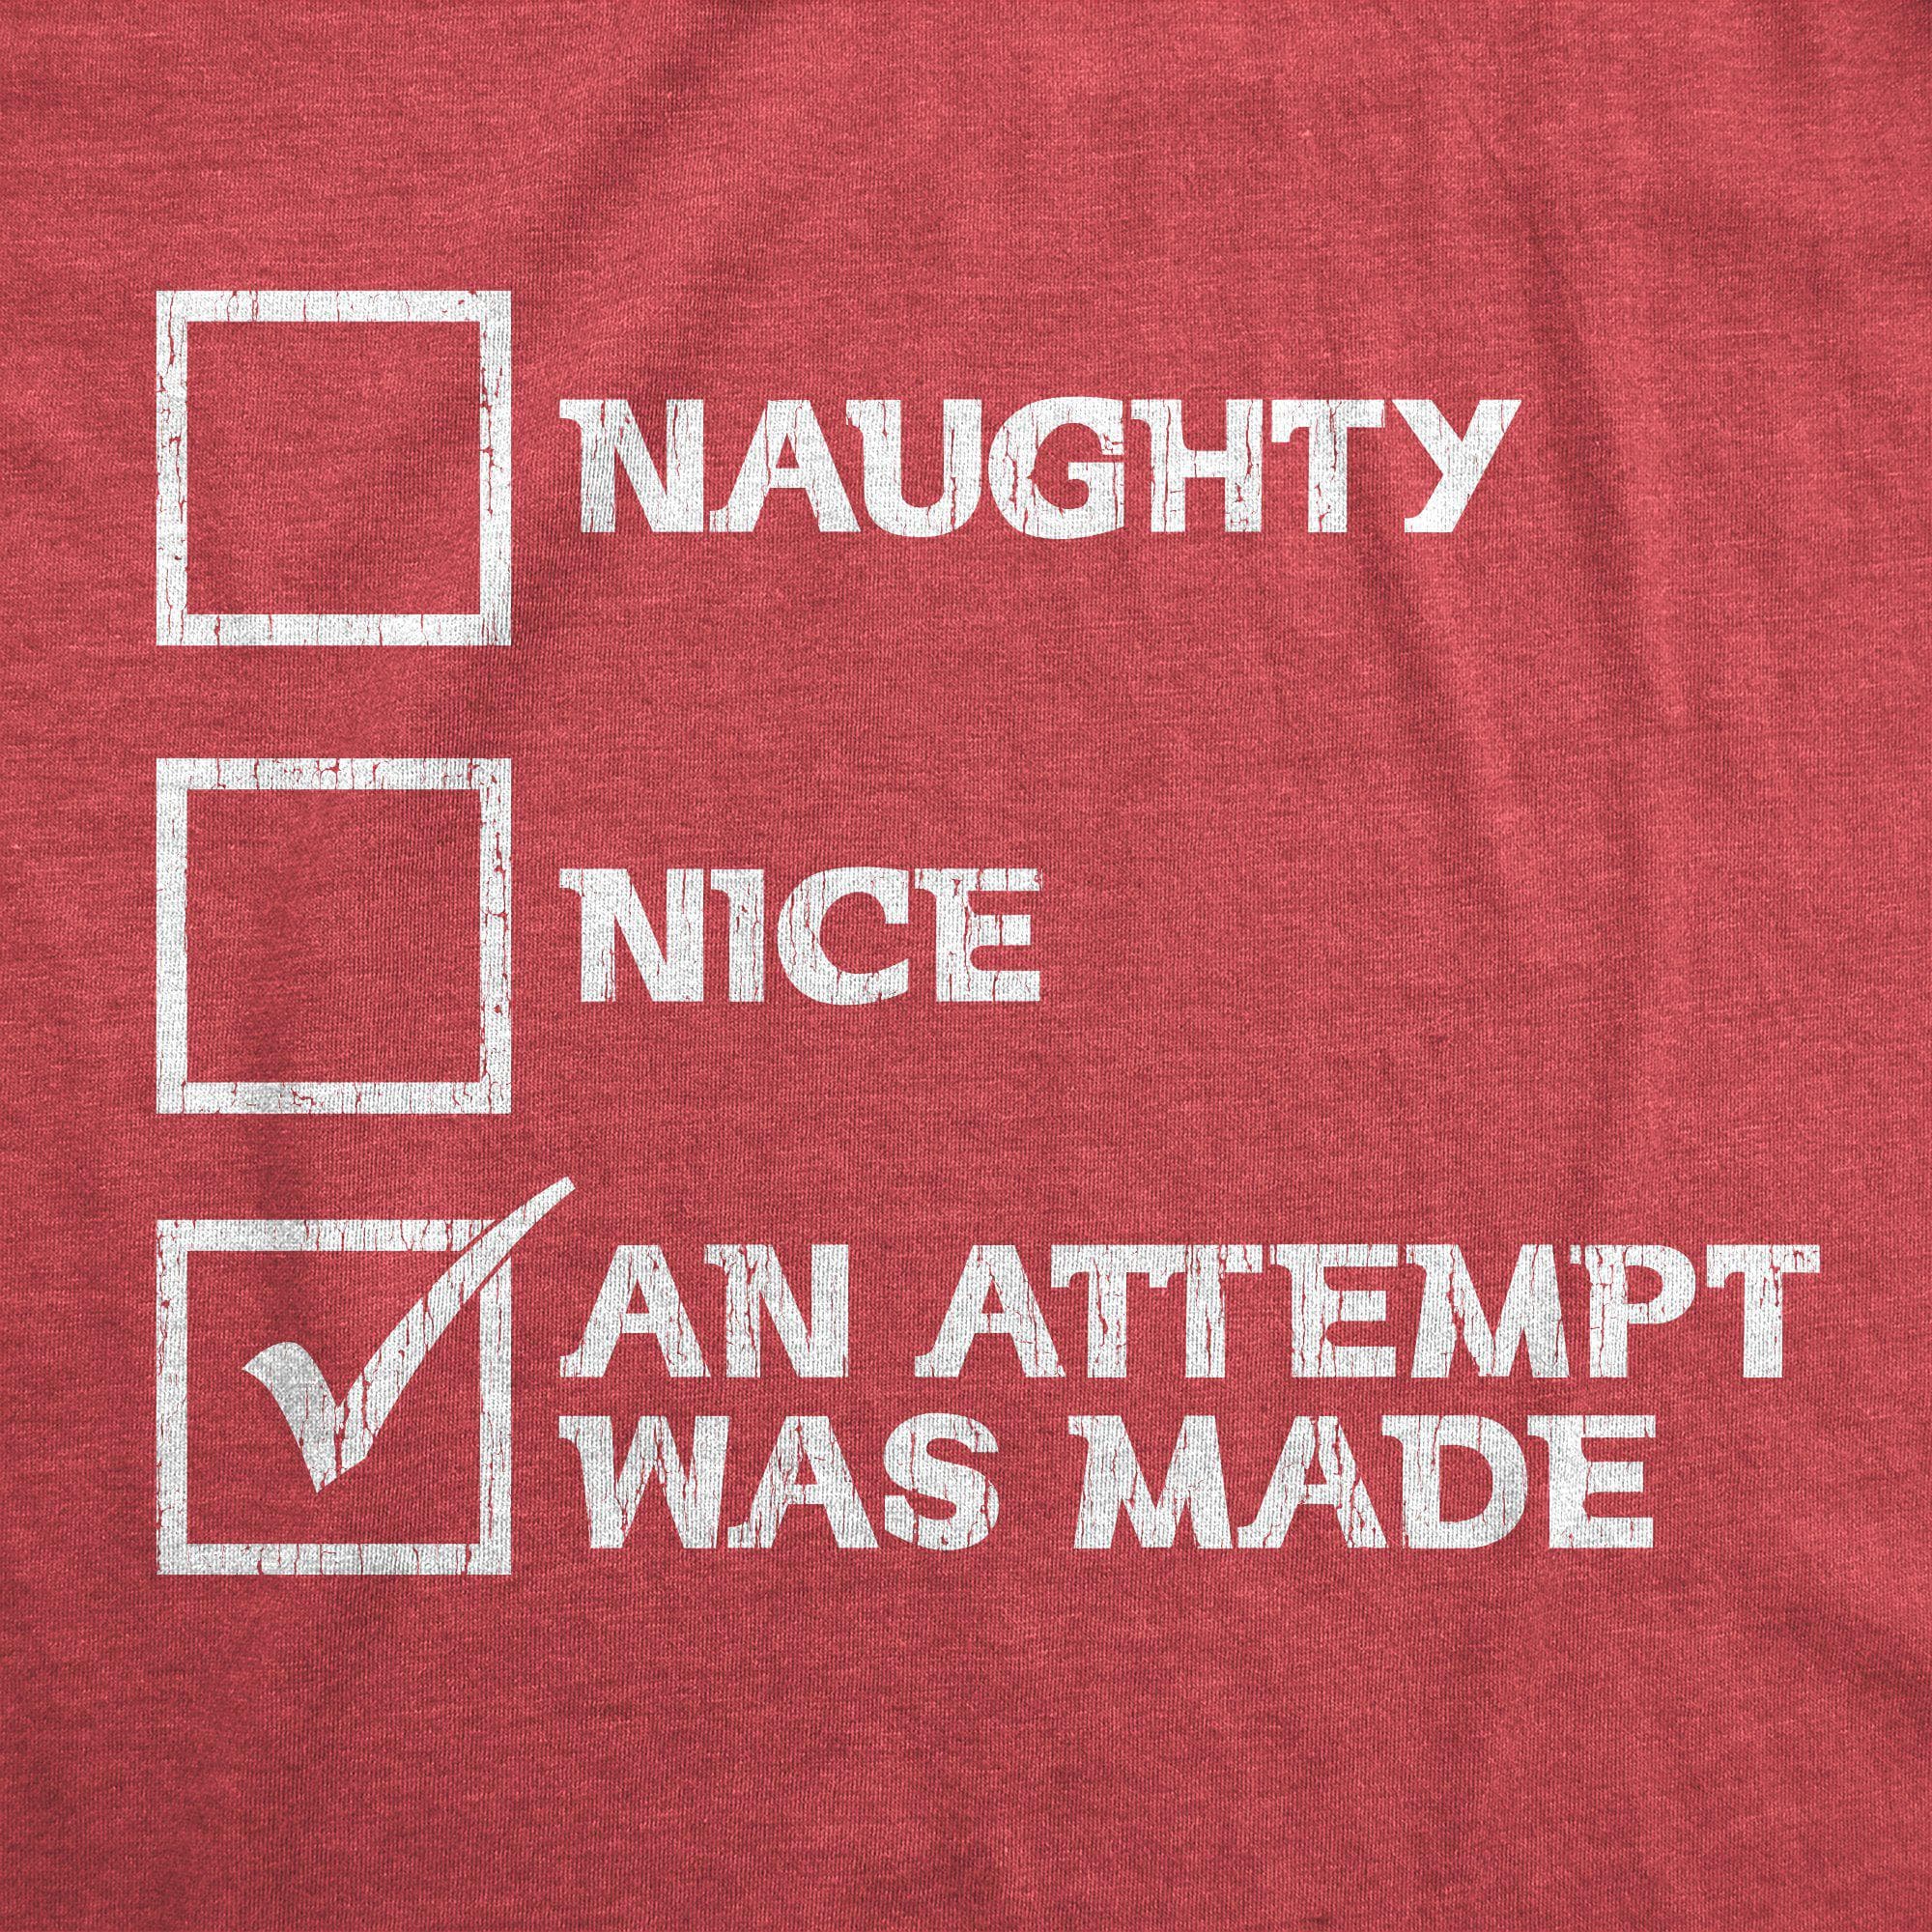 Naughty Nice An Attempt Was Made Women's Tshirt - Crazy Dog T-Shirts